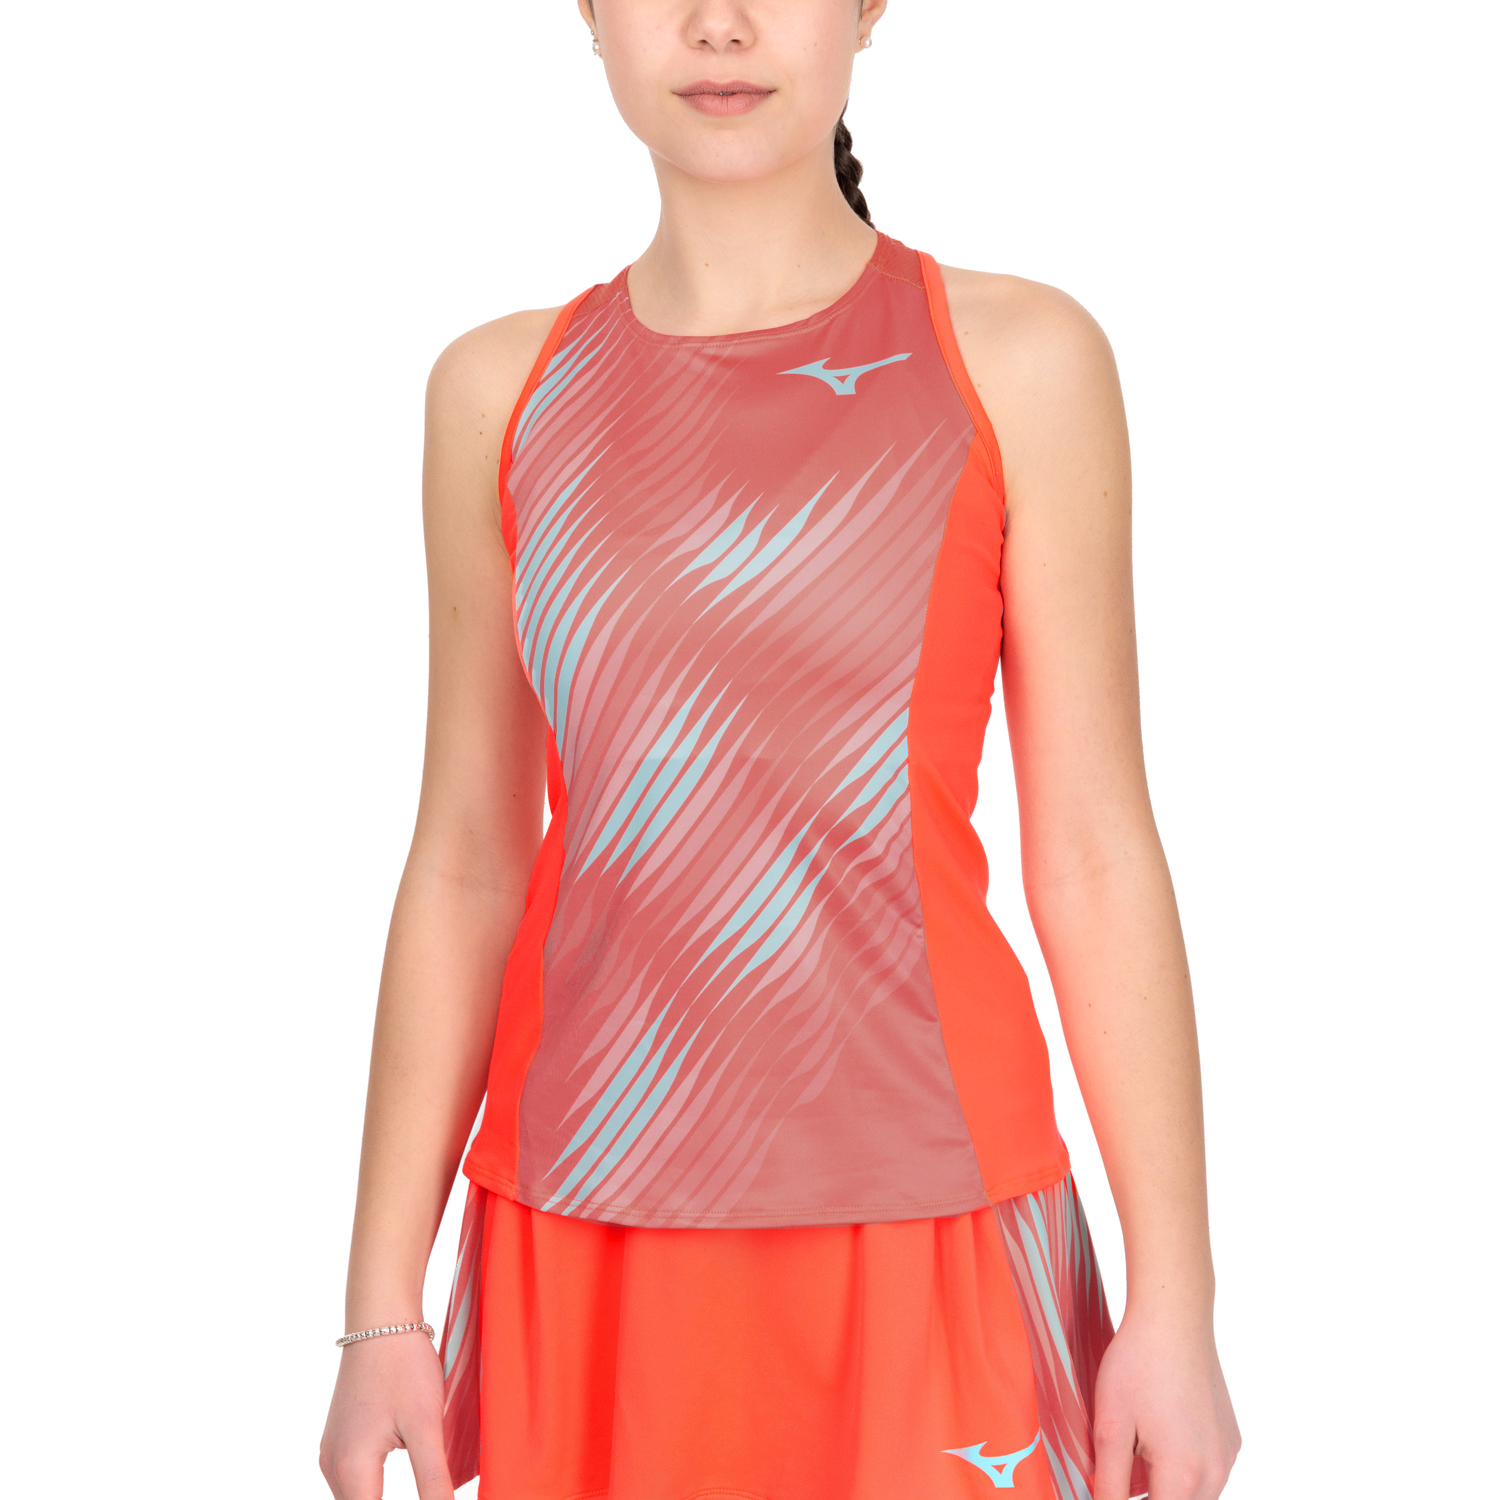 Mizuno Printed Top - Fierry Coral